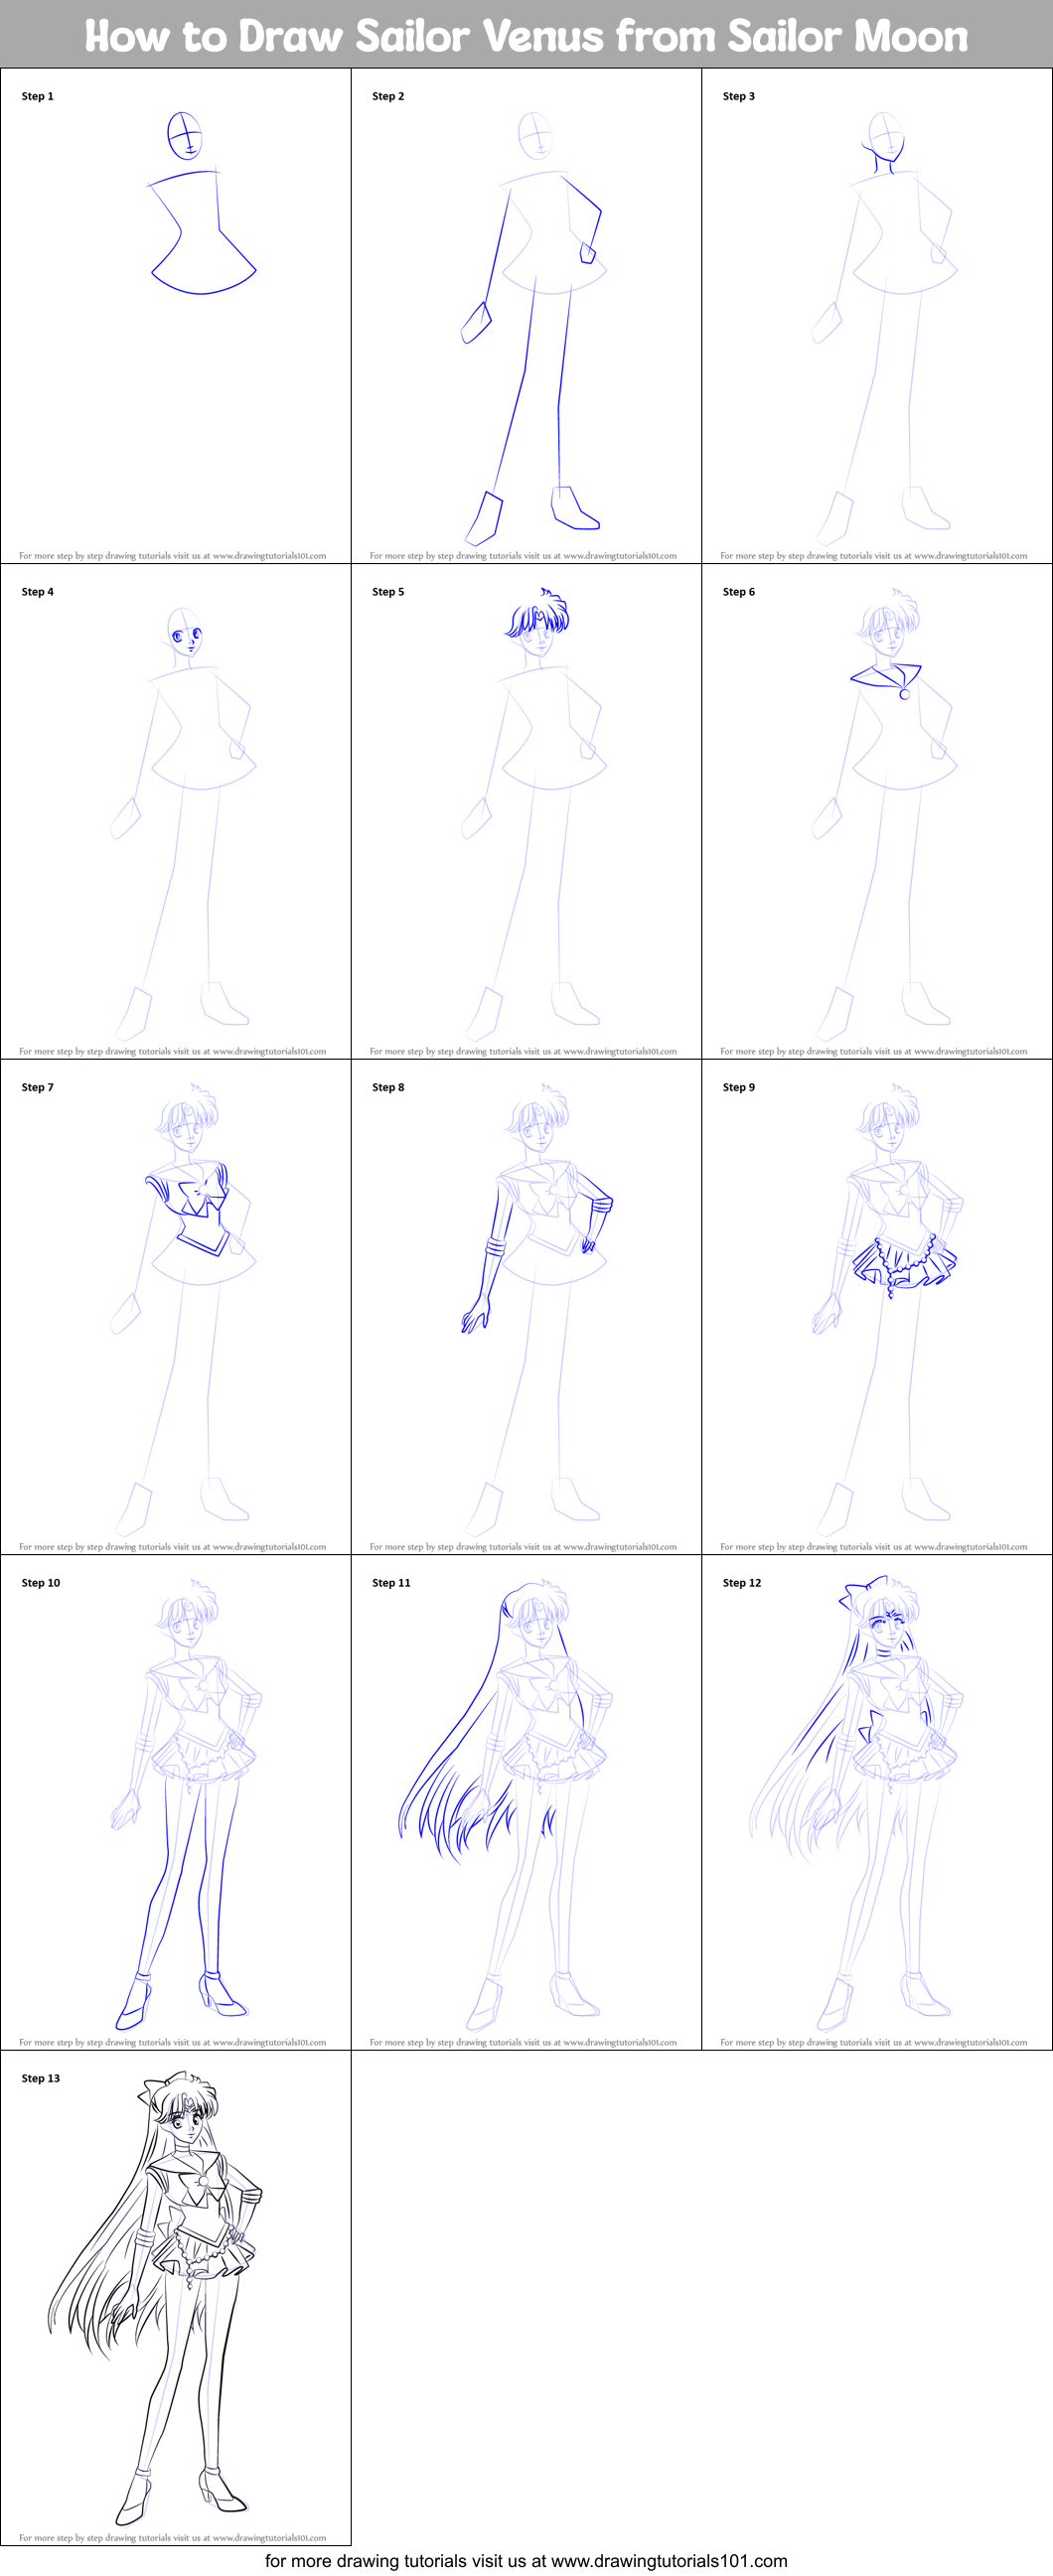 How to Draw Sailor Venus from Sailor Moon printable step by step